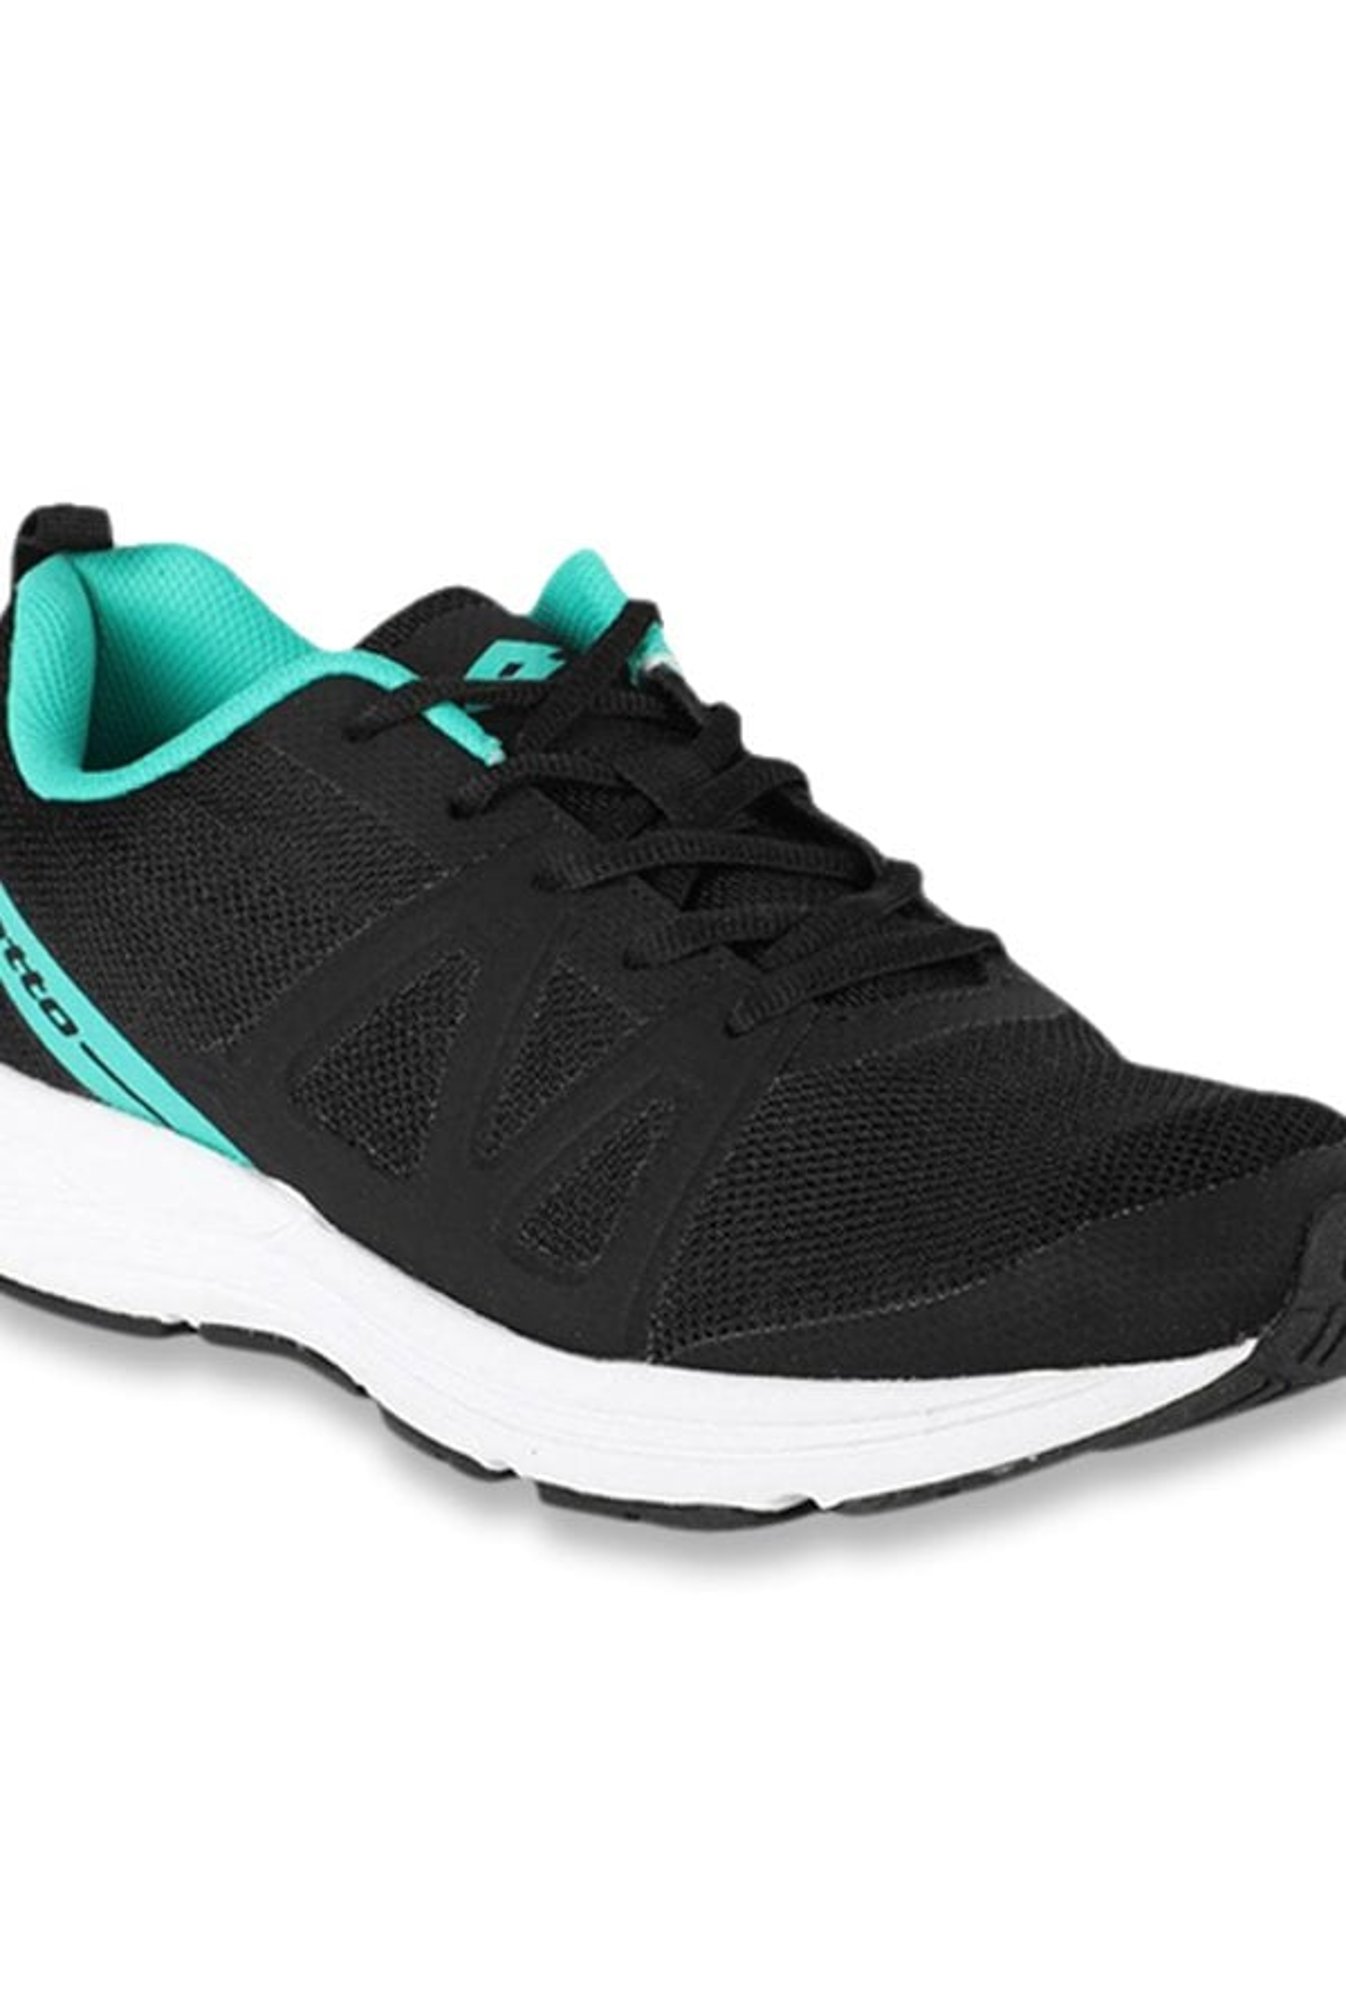 Buy Lotto Flint Black Running Shoes for 